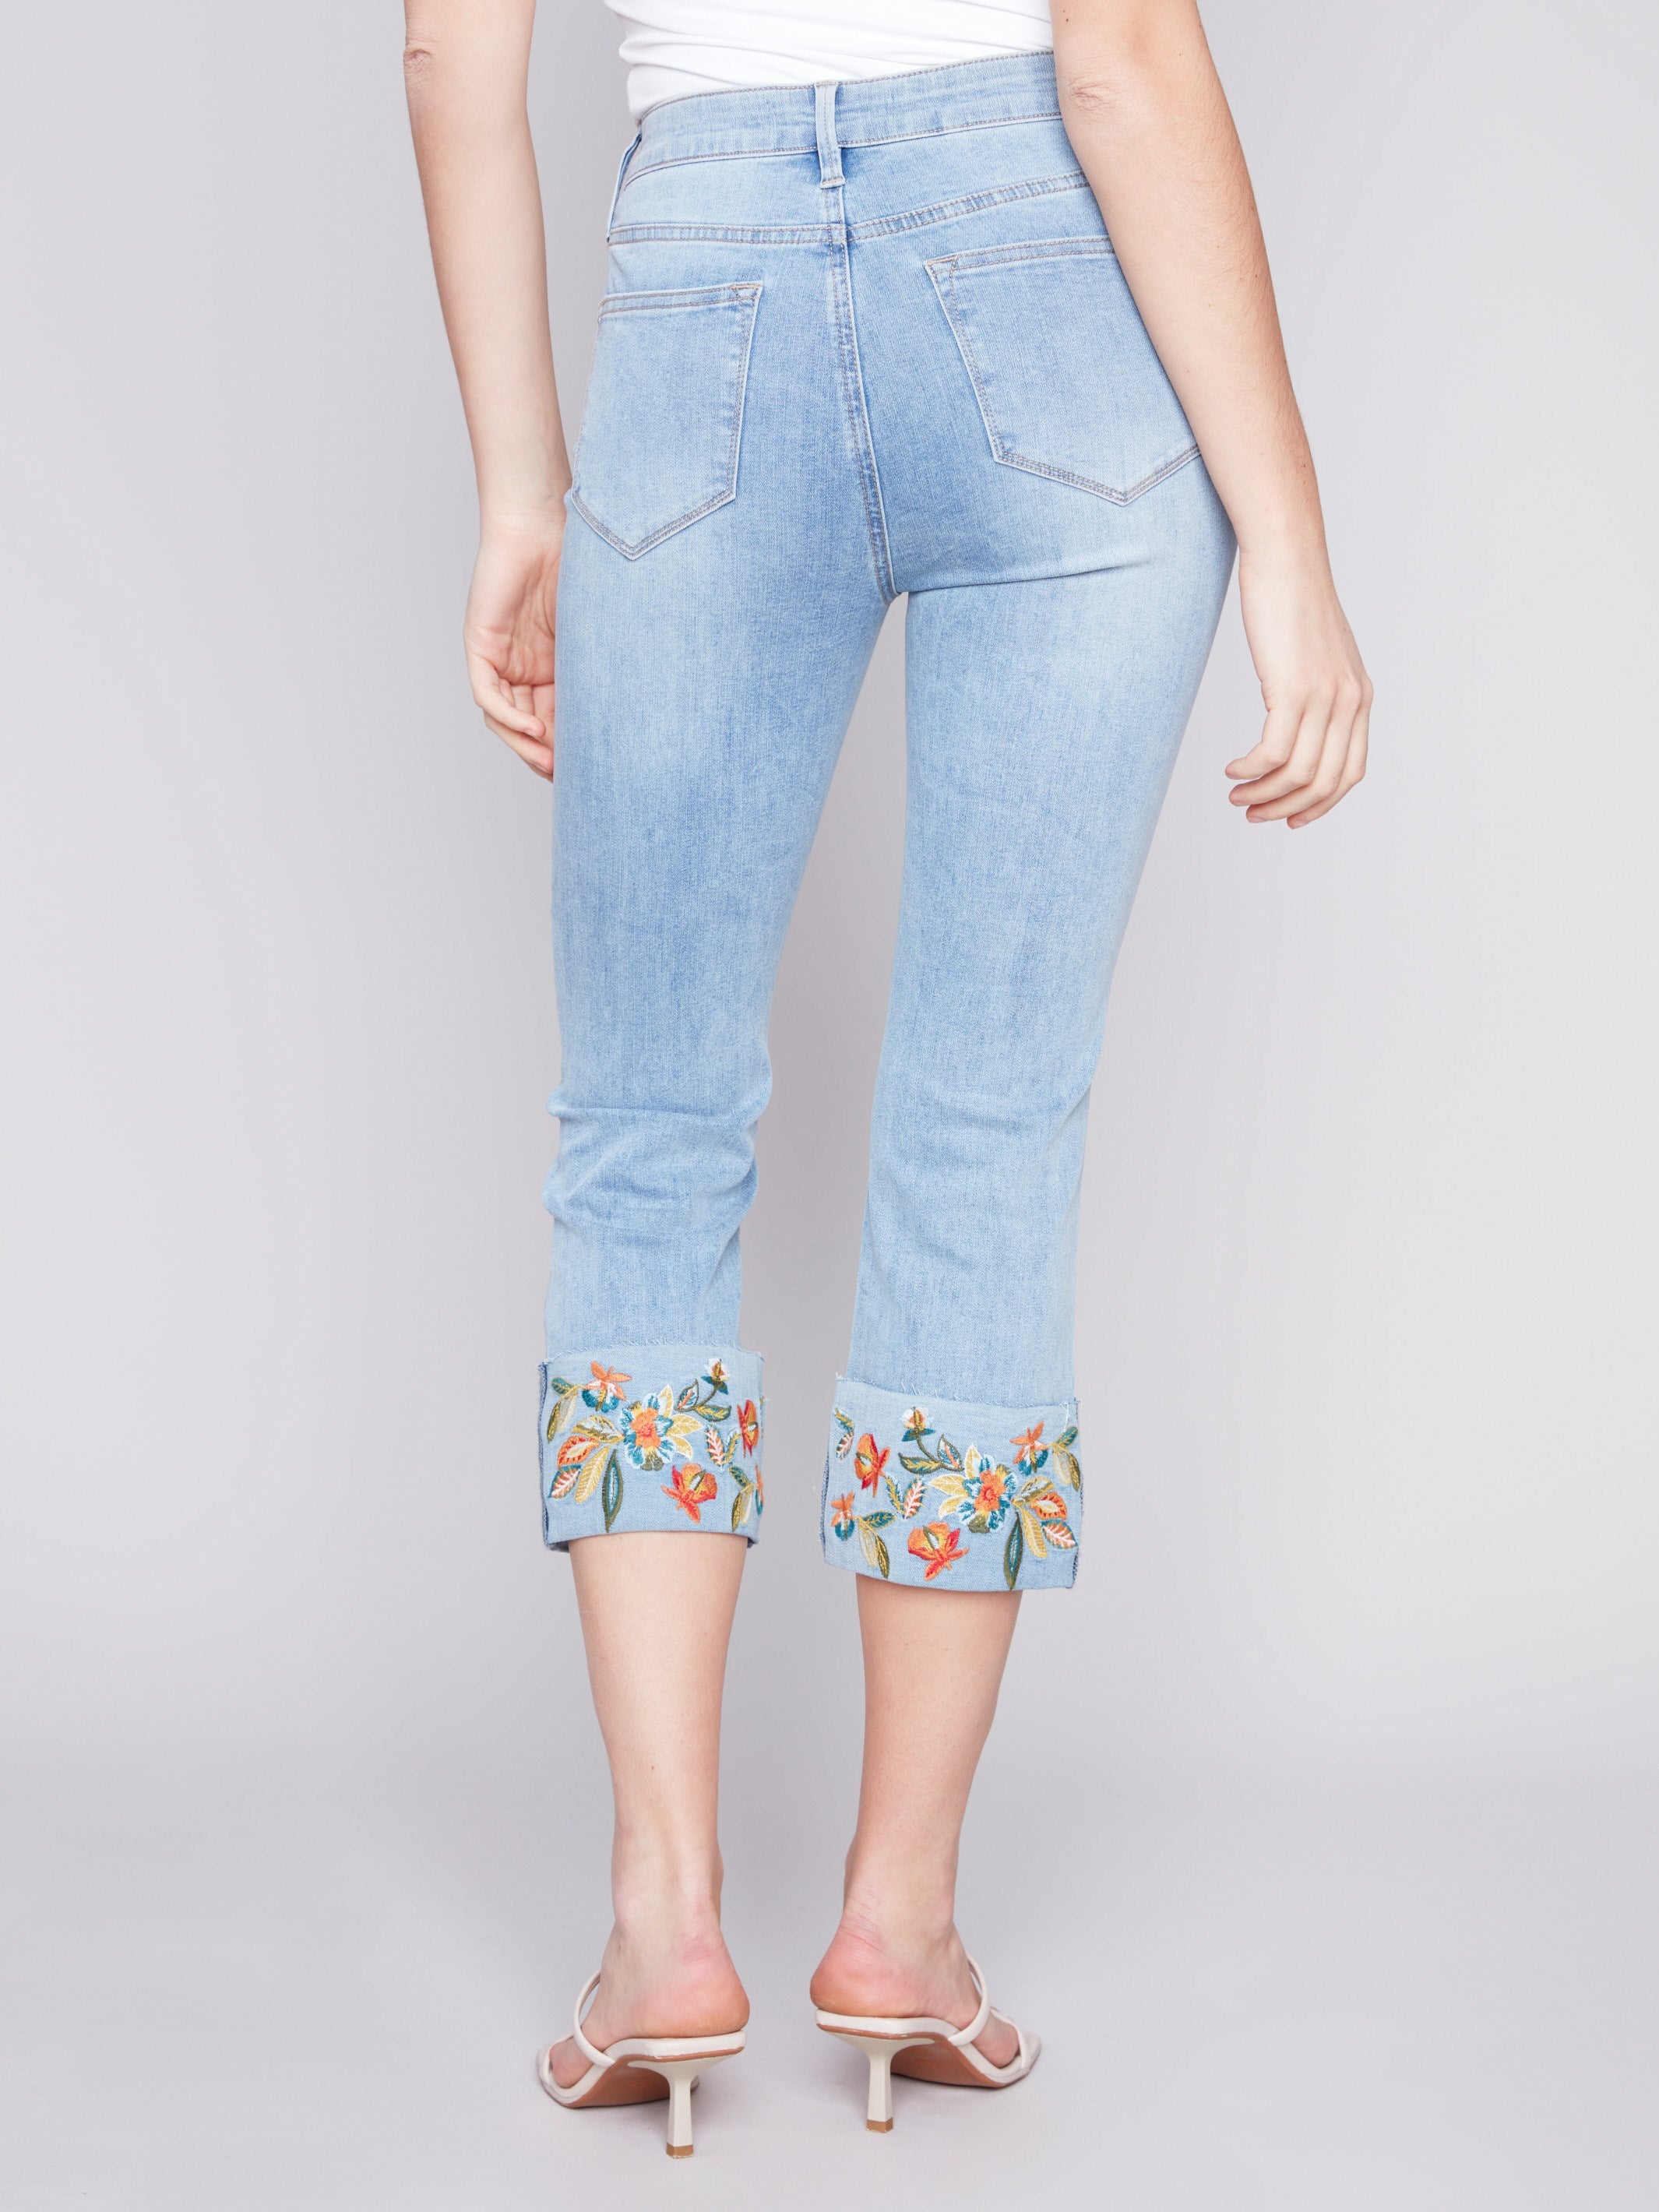 Charlie B Cropped Jeans with Embroidered Cuff - Light Blue - Image 3